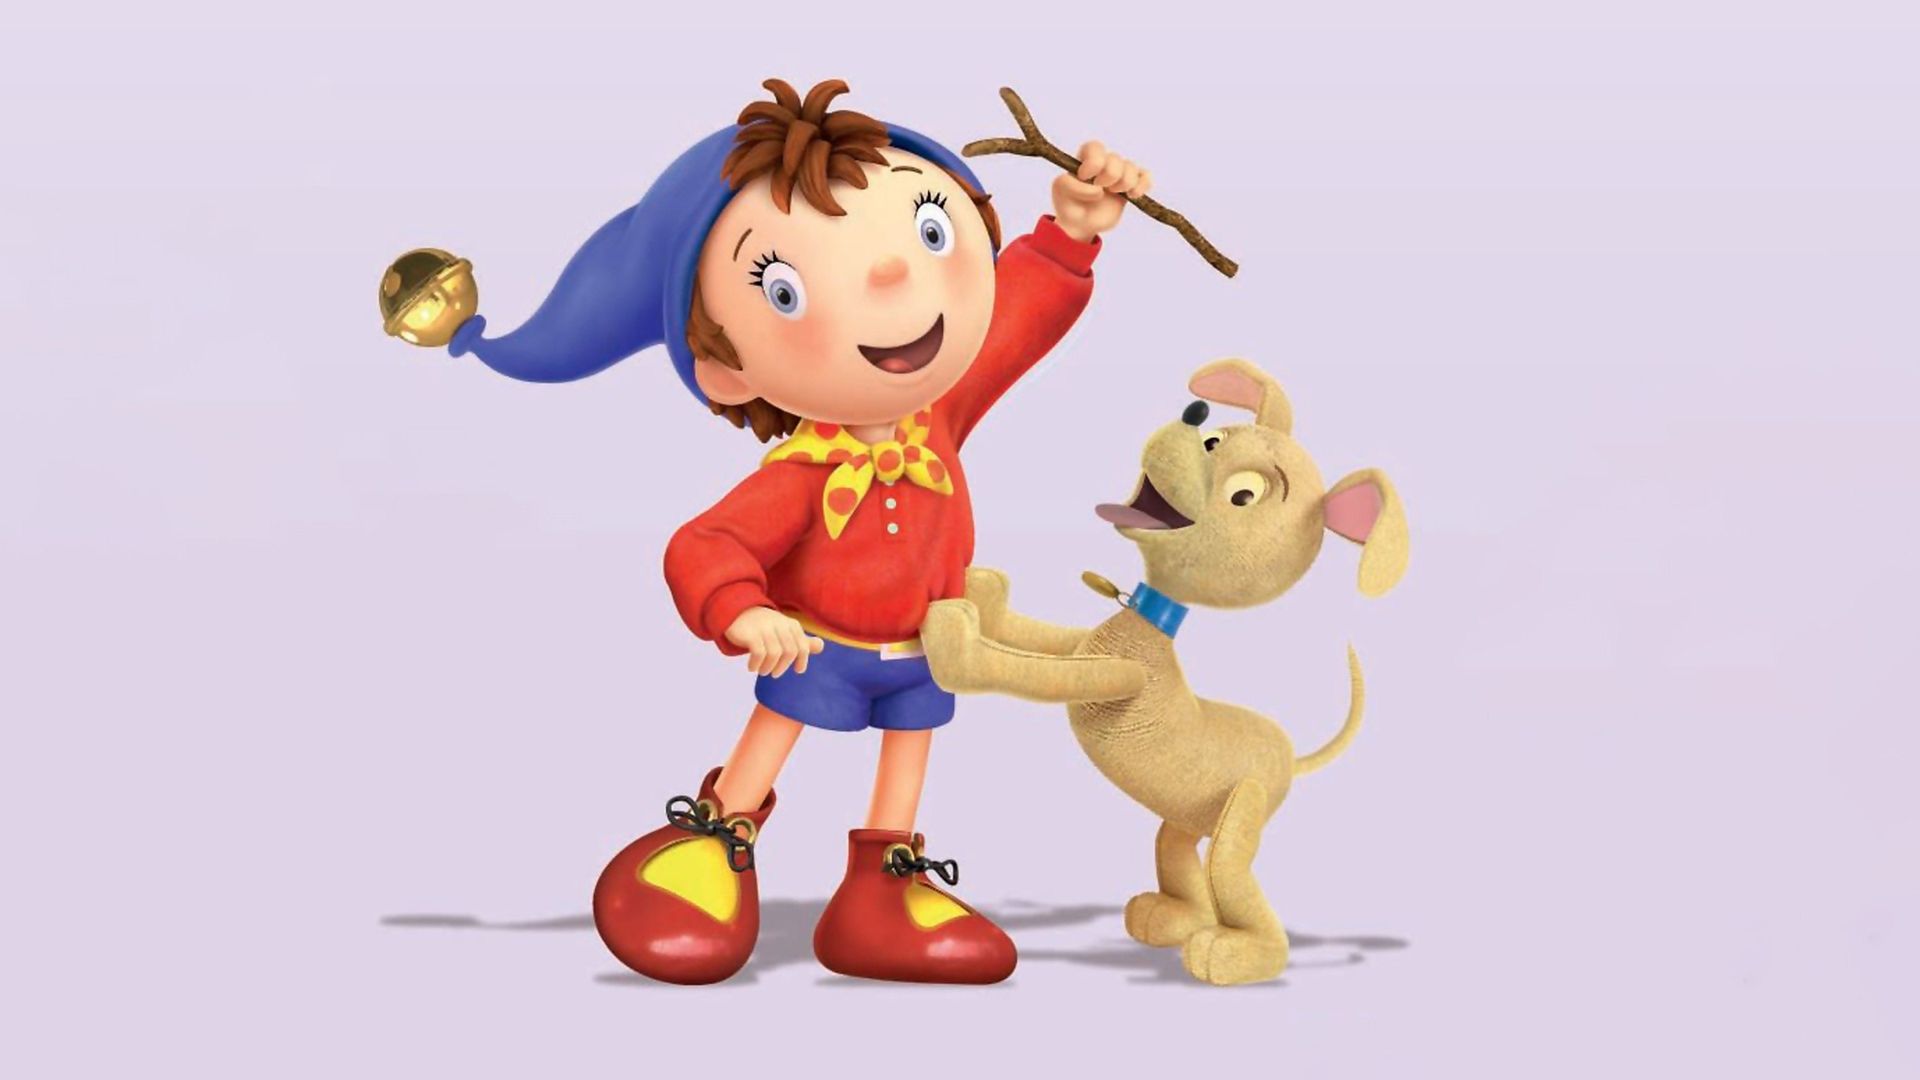 22 Facts About Noddy (Make Way For Noddy) - Facts.net